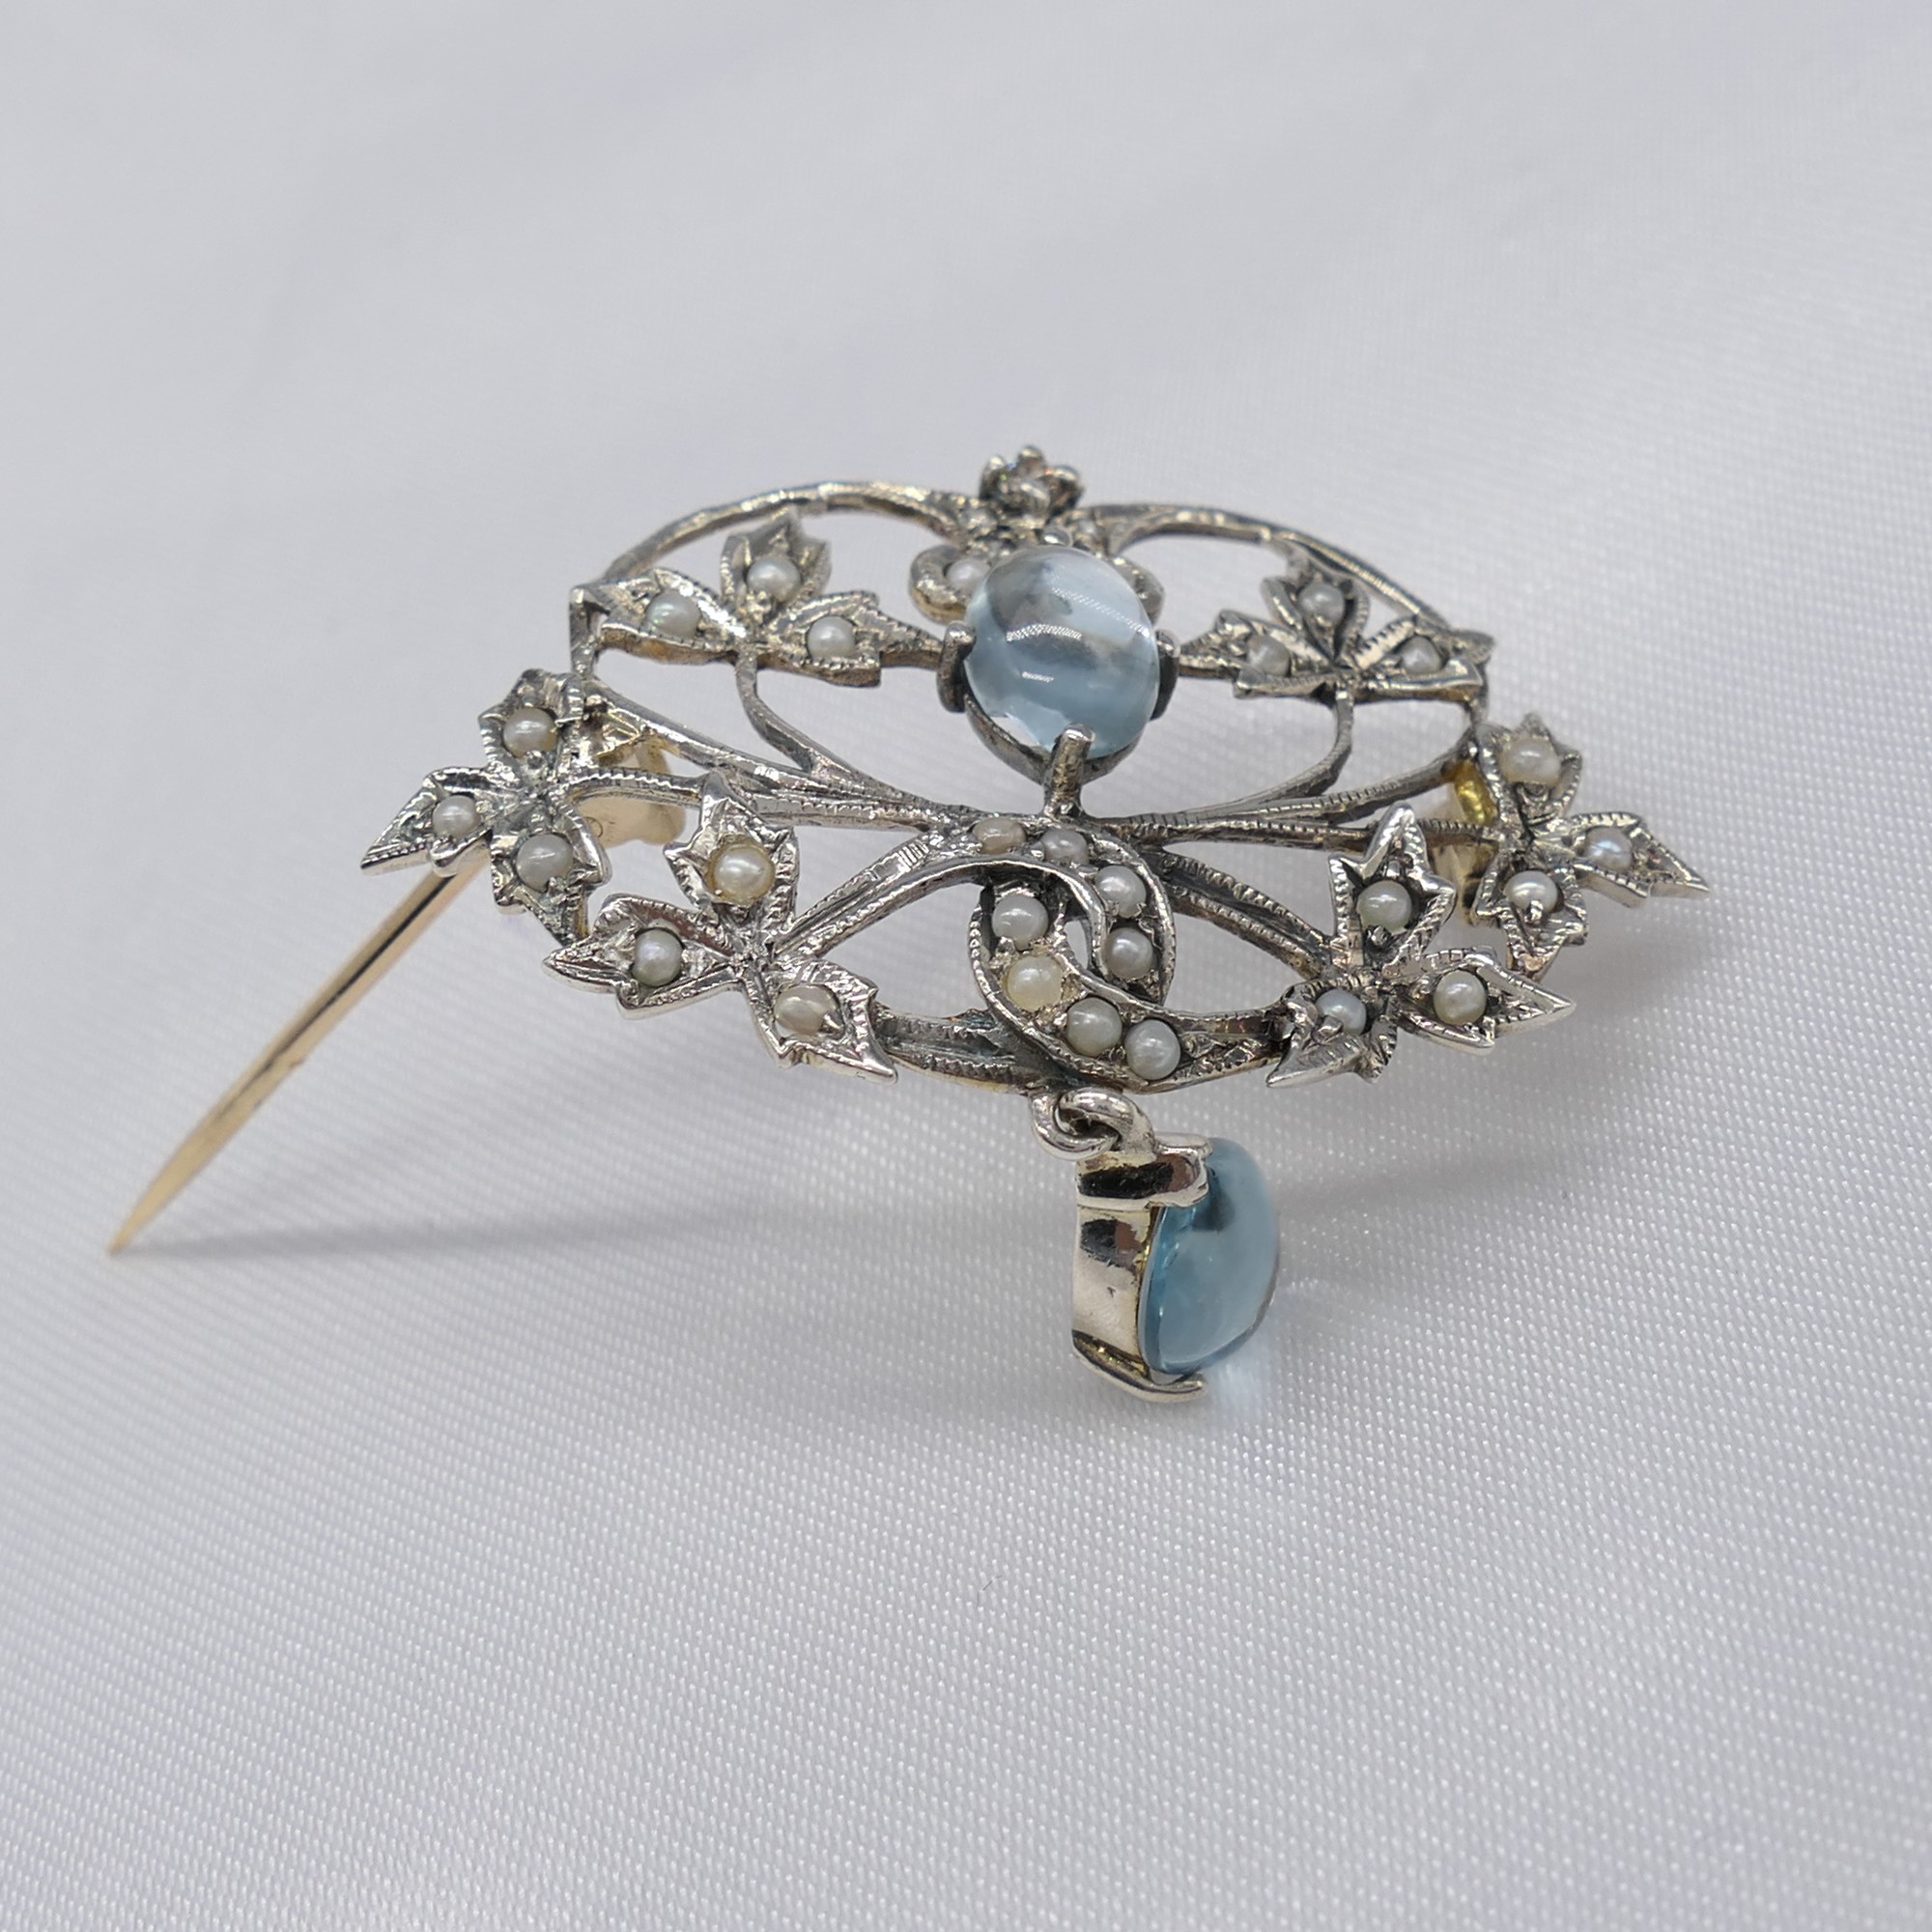 Edwardian-Style Topaz And Diamond Brooch With 2 Pi - Image 7 of 7